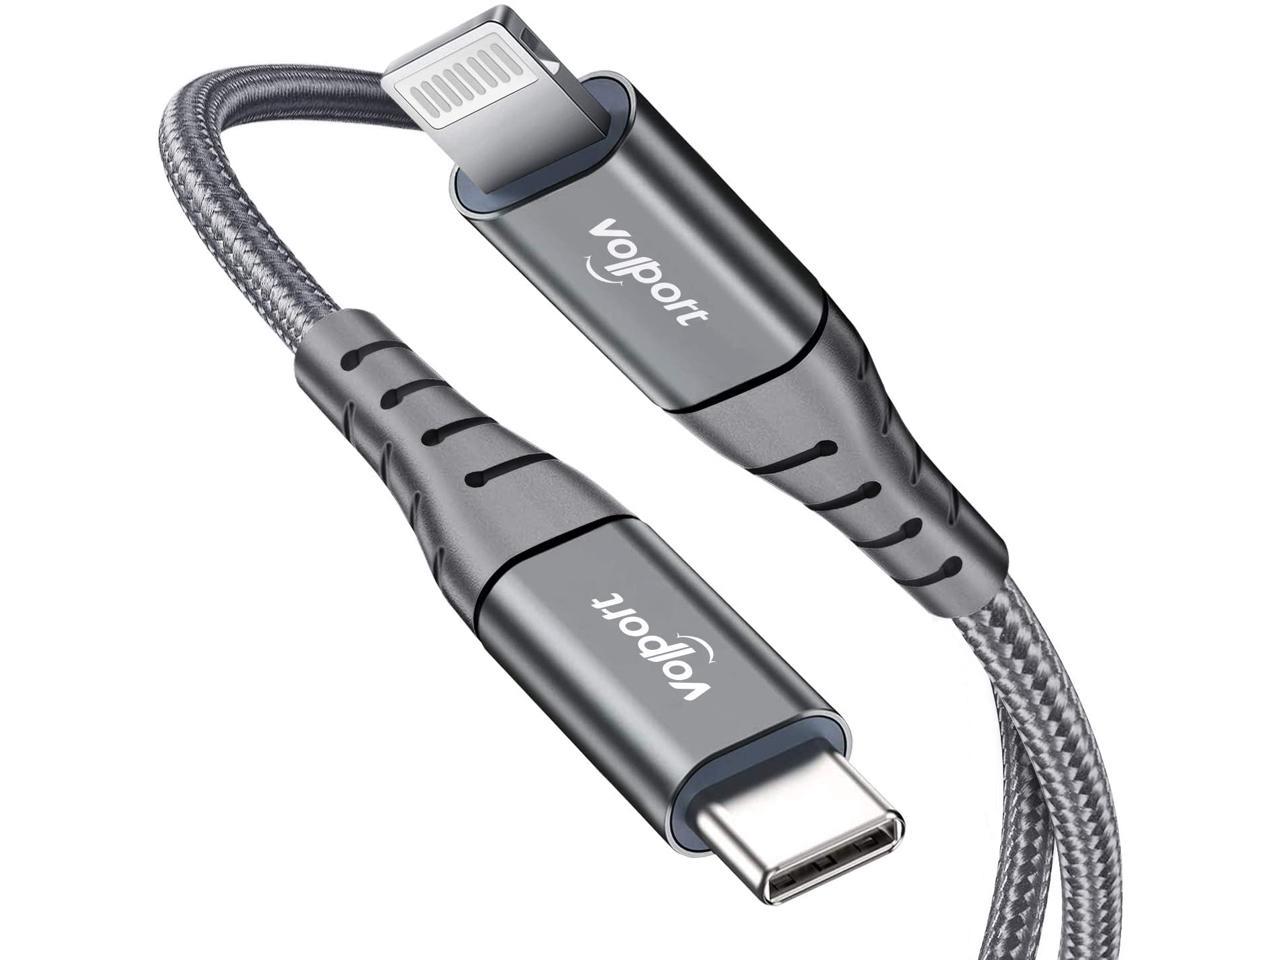 Basics Nylon Braided USB-C to Lightning Cable 6-Foot MFi Certified Charger for iPhone 11/11 Pro/11 Pro Max/X/XS/XR/XS Max/8/8 Plus Dark Gray 